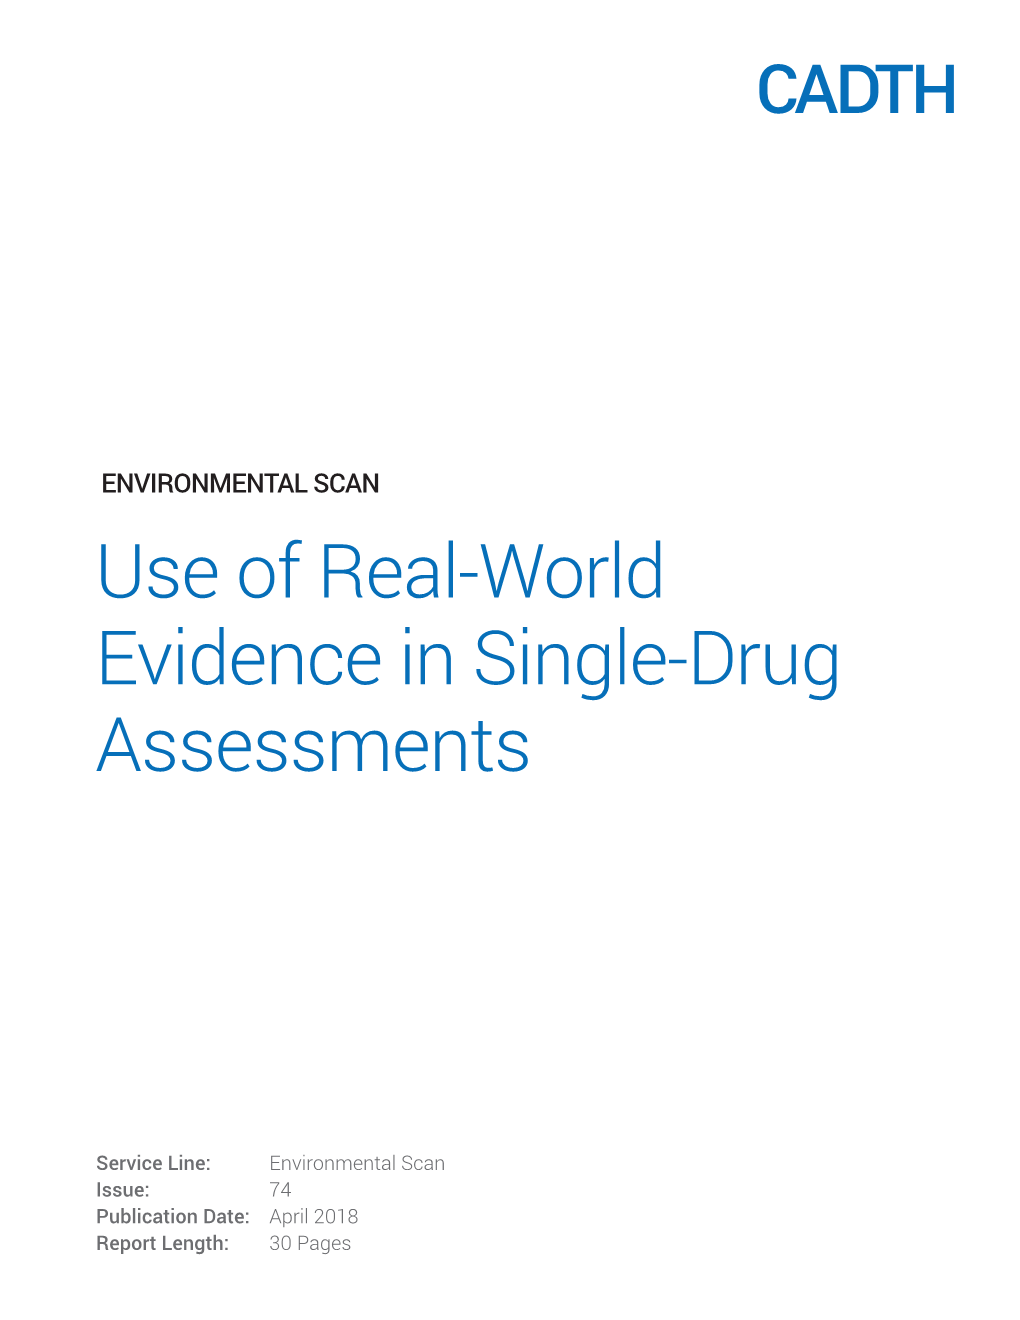 Use of Real-World Evidence in Single-Drug Assessments